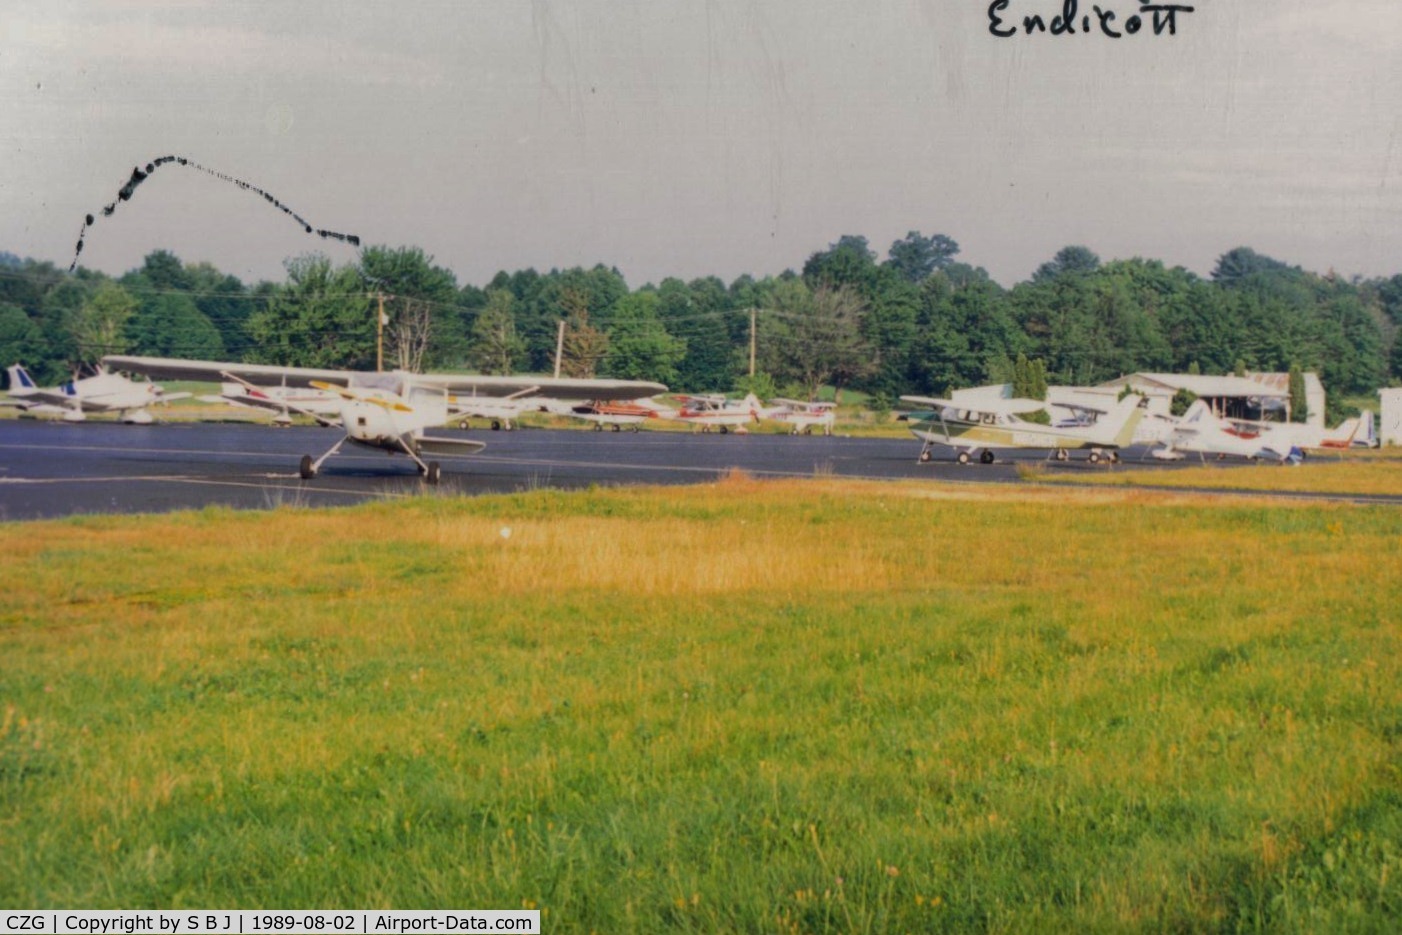 Tri-cities Airport (CZG) - The Tri-cities ramp as it looked in 1989. 